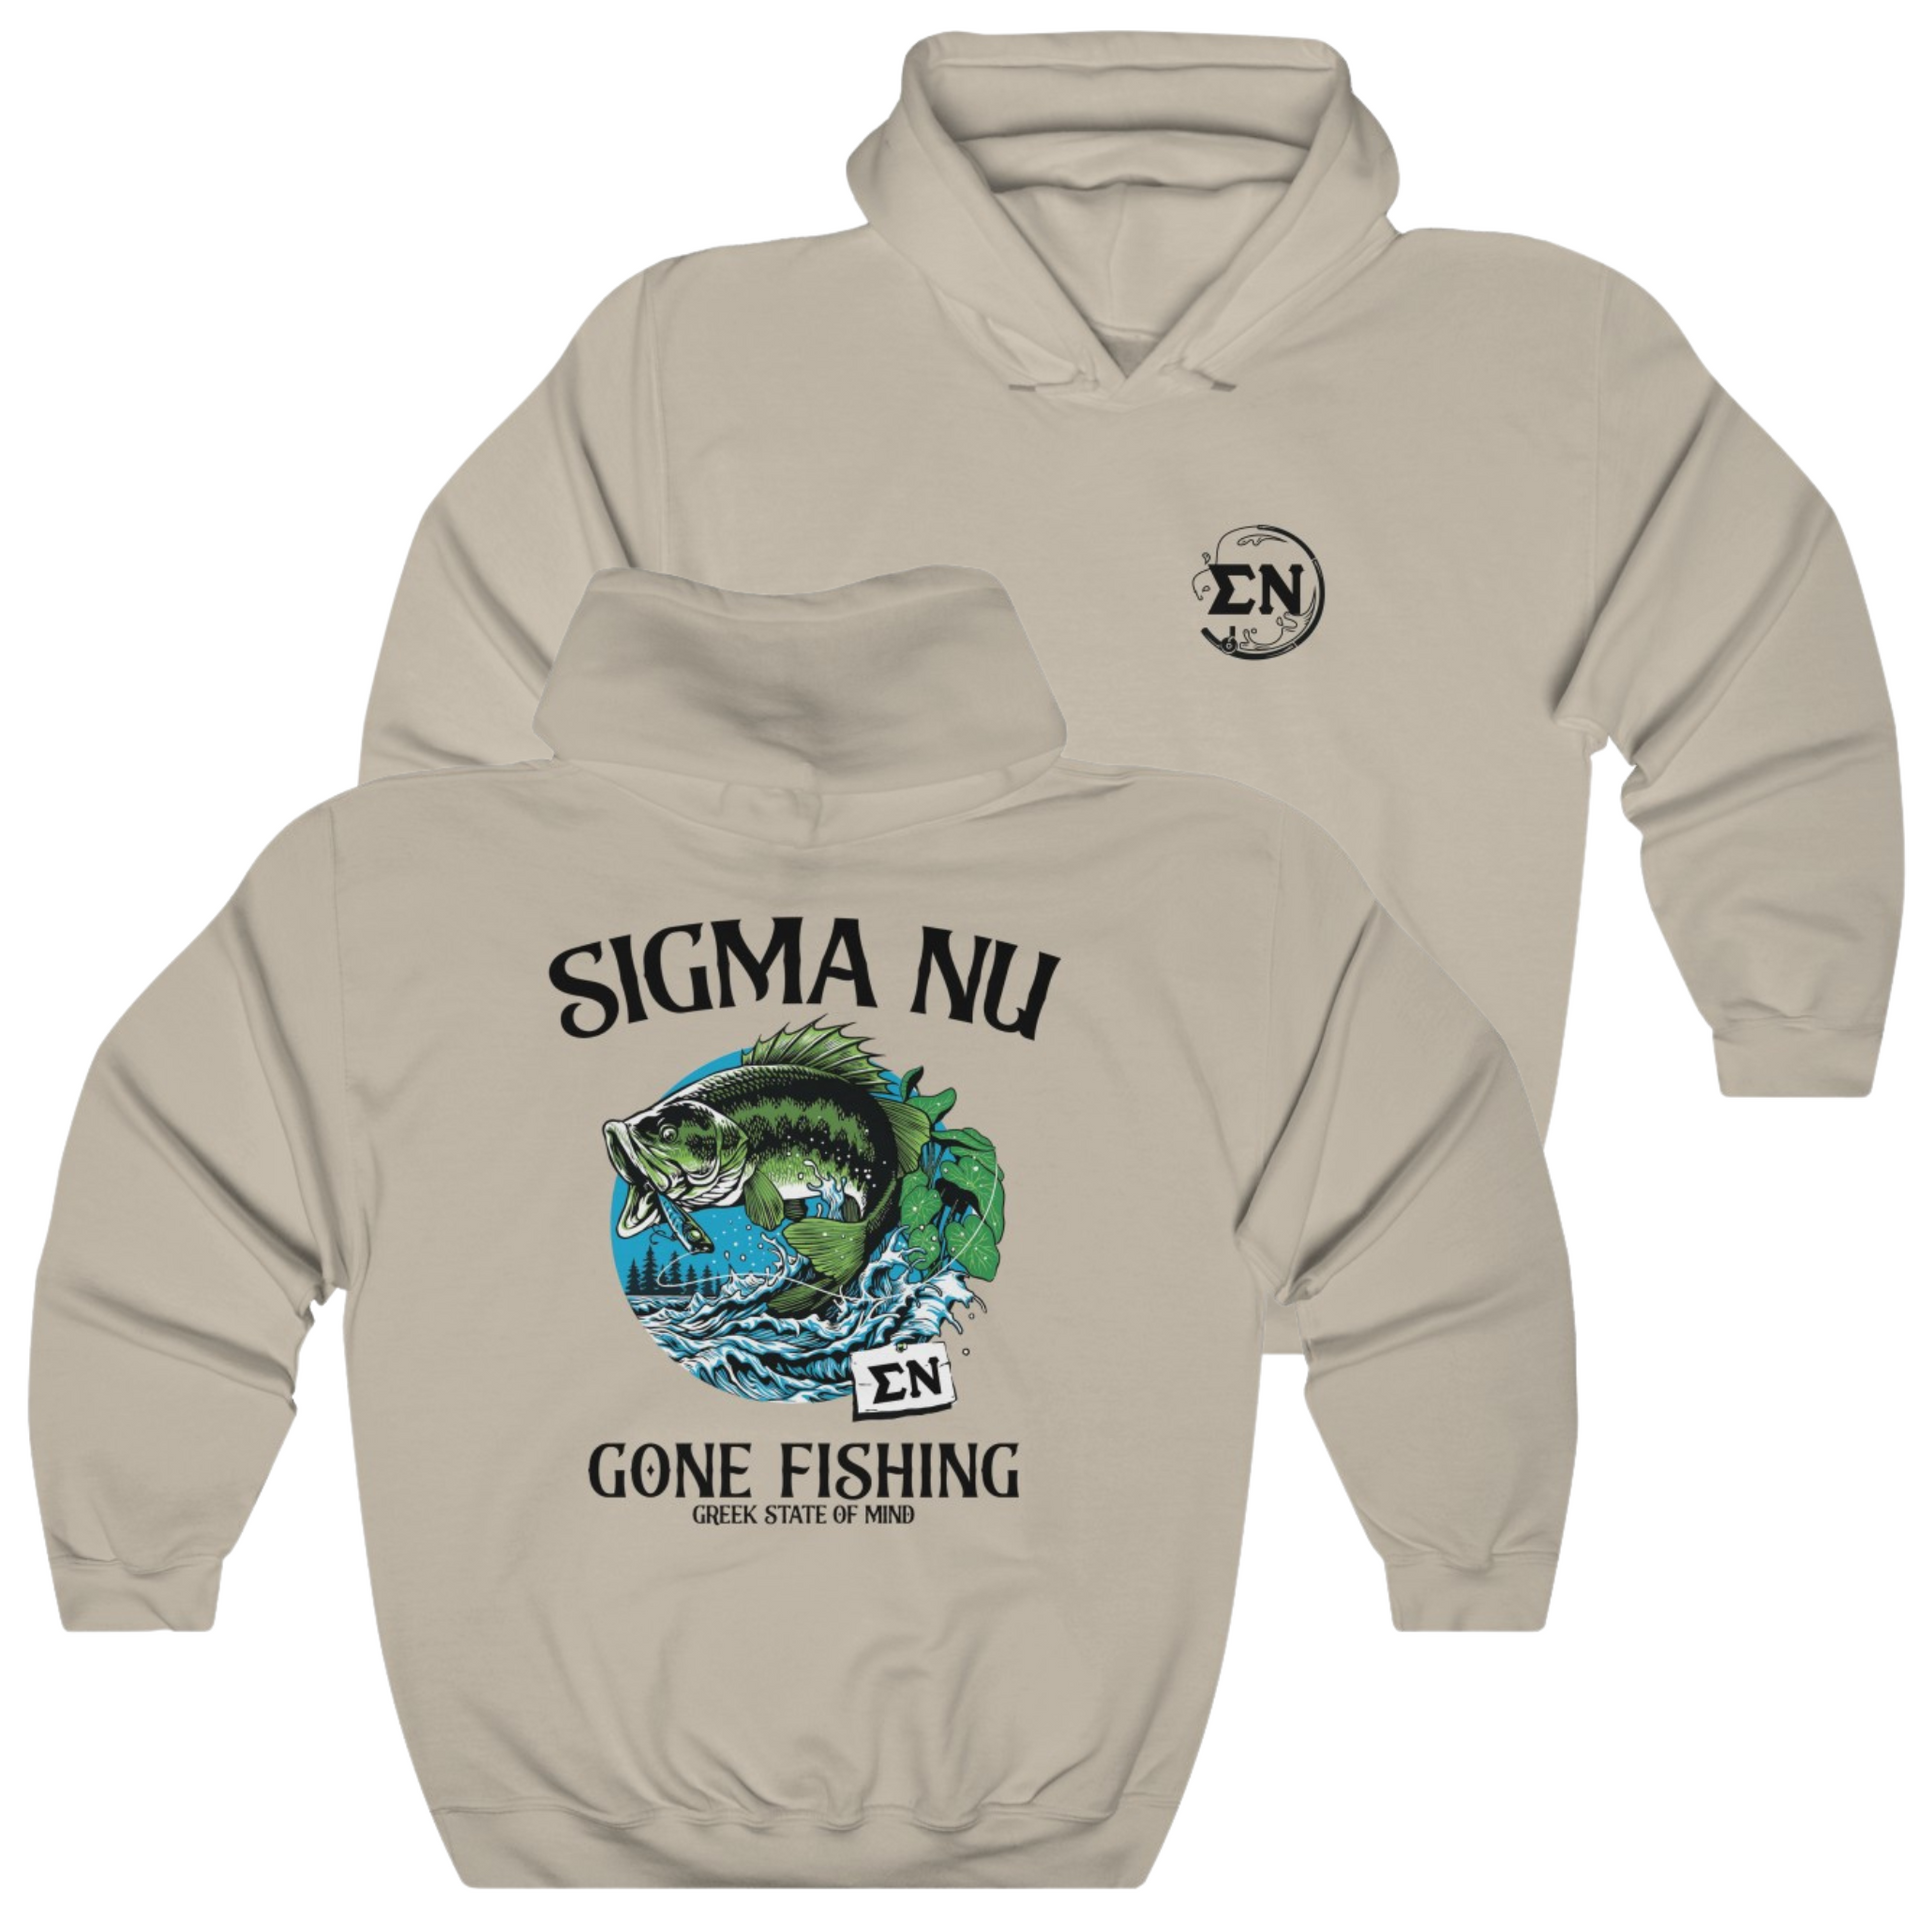 Sand Sigma Nu Graphic Hoodie | Gone Fishing | Sigma Nu Clothing, Apparel and Merchandise